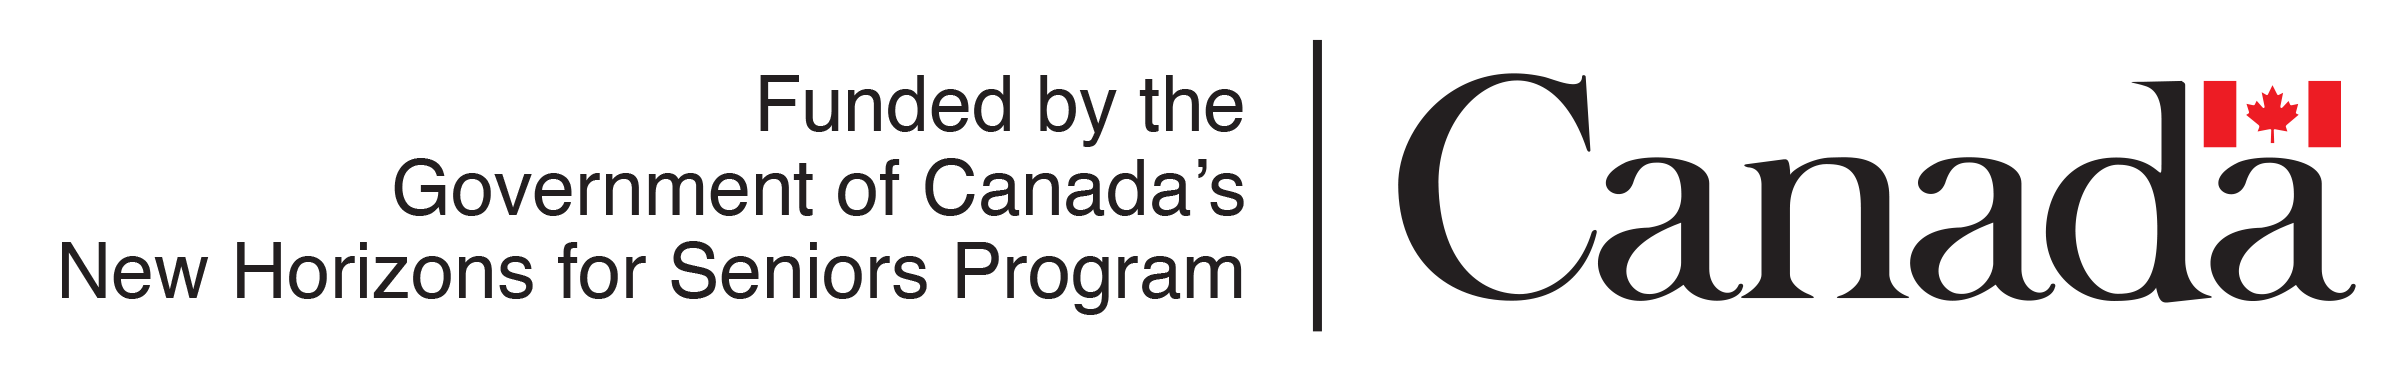 The Government of Canada's New Horizons for Seniors Program